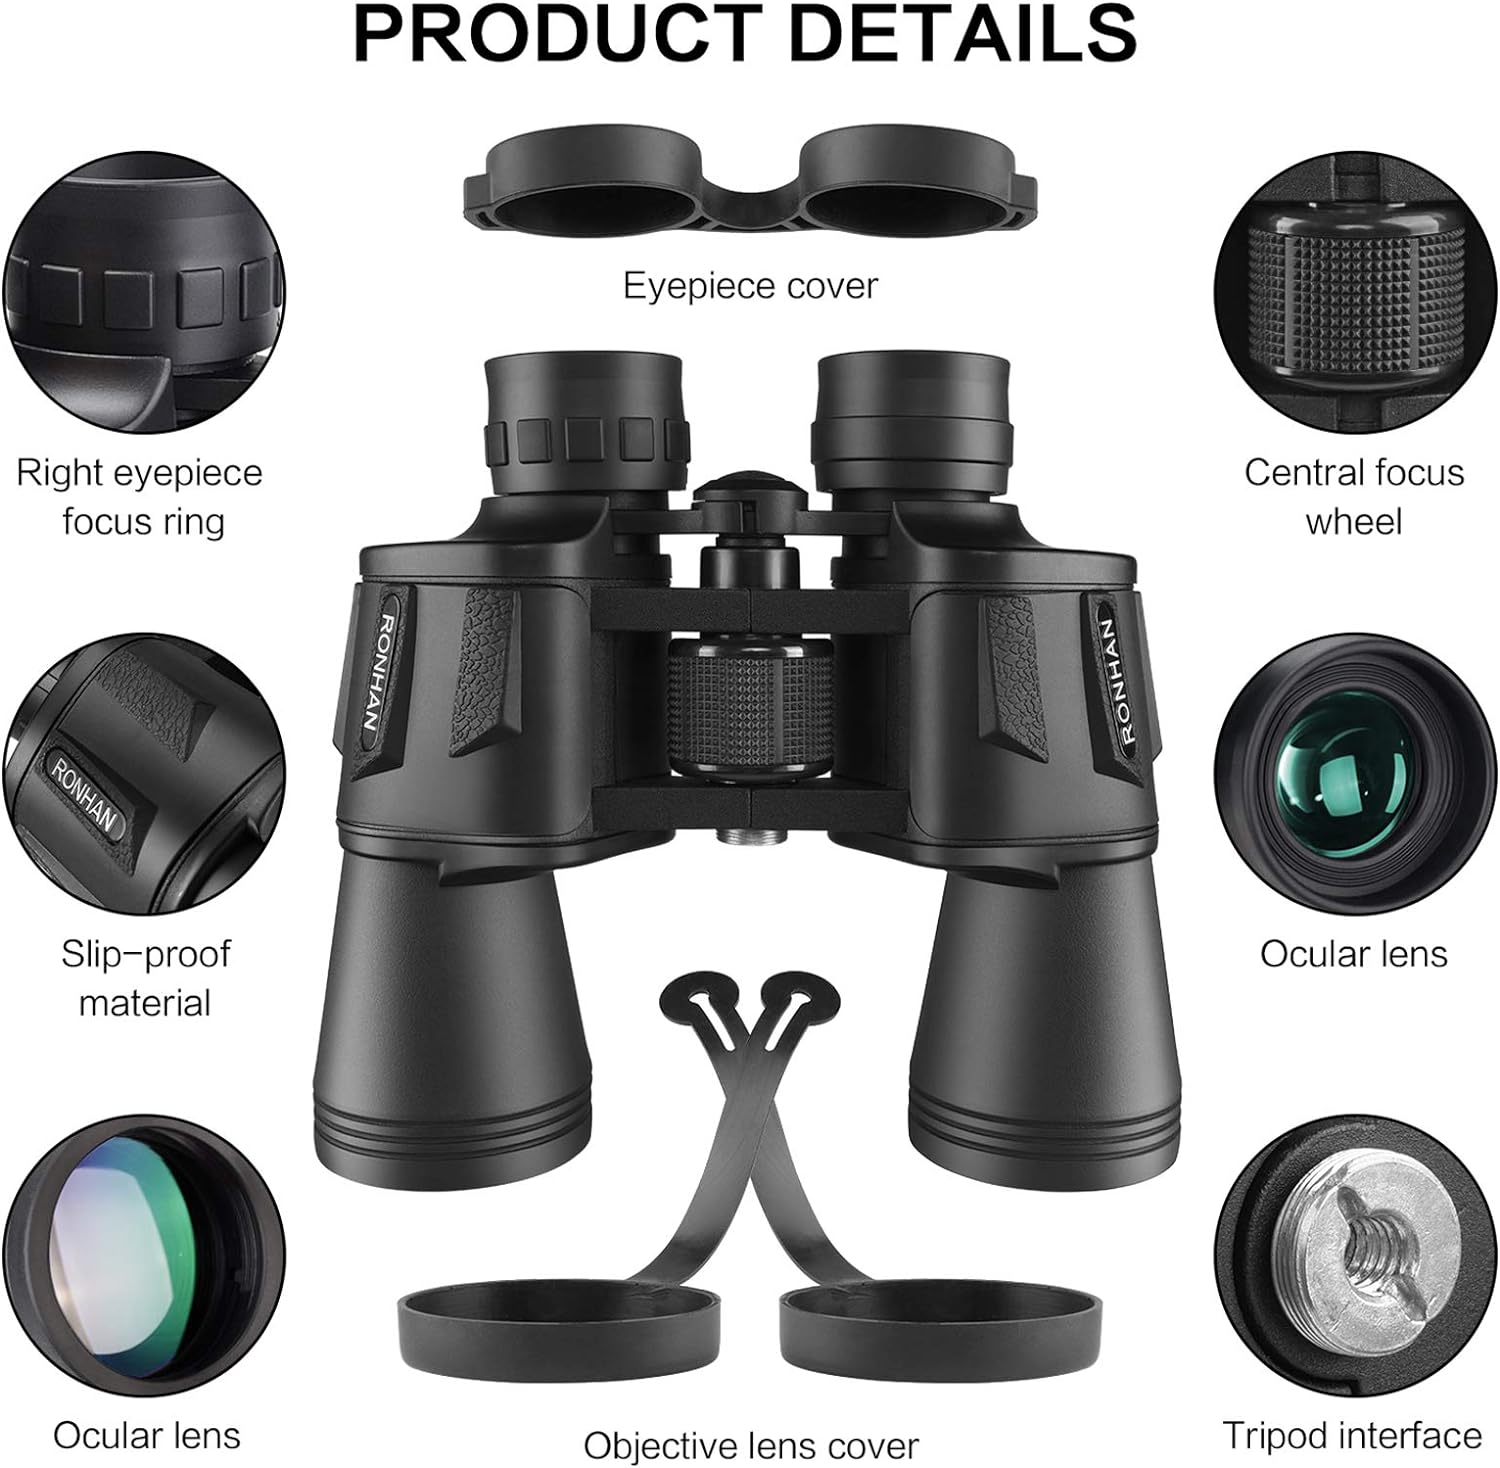 20x50 Binoculars for Adults High Powered, Military Compact HD Professional/Daily Waterproof Binoculars Telescope for Bird Watching Travel Hunting Football Games Stargazing with Carrying Case and Strap